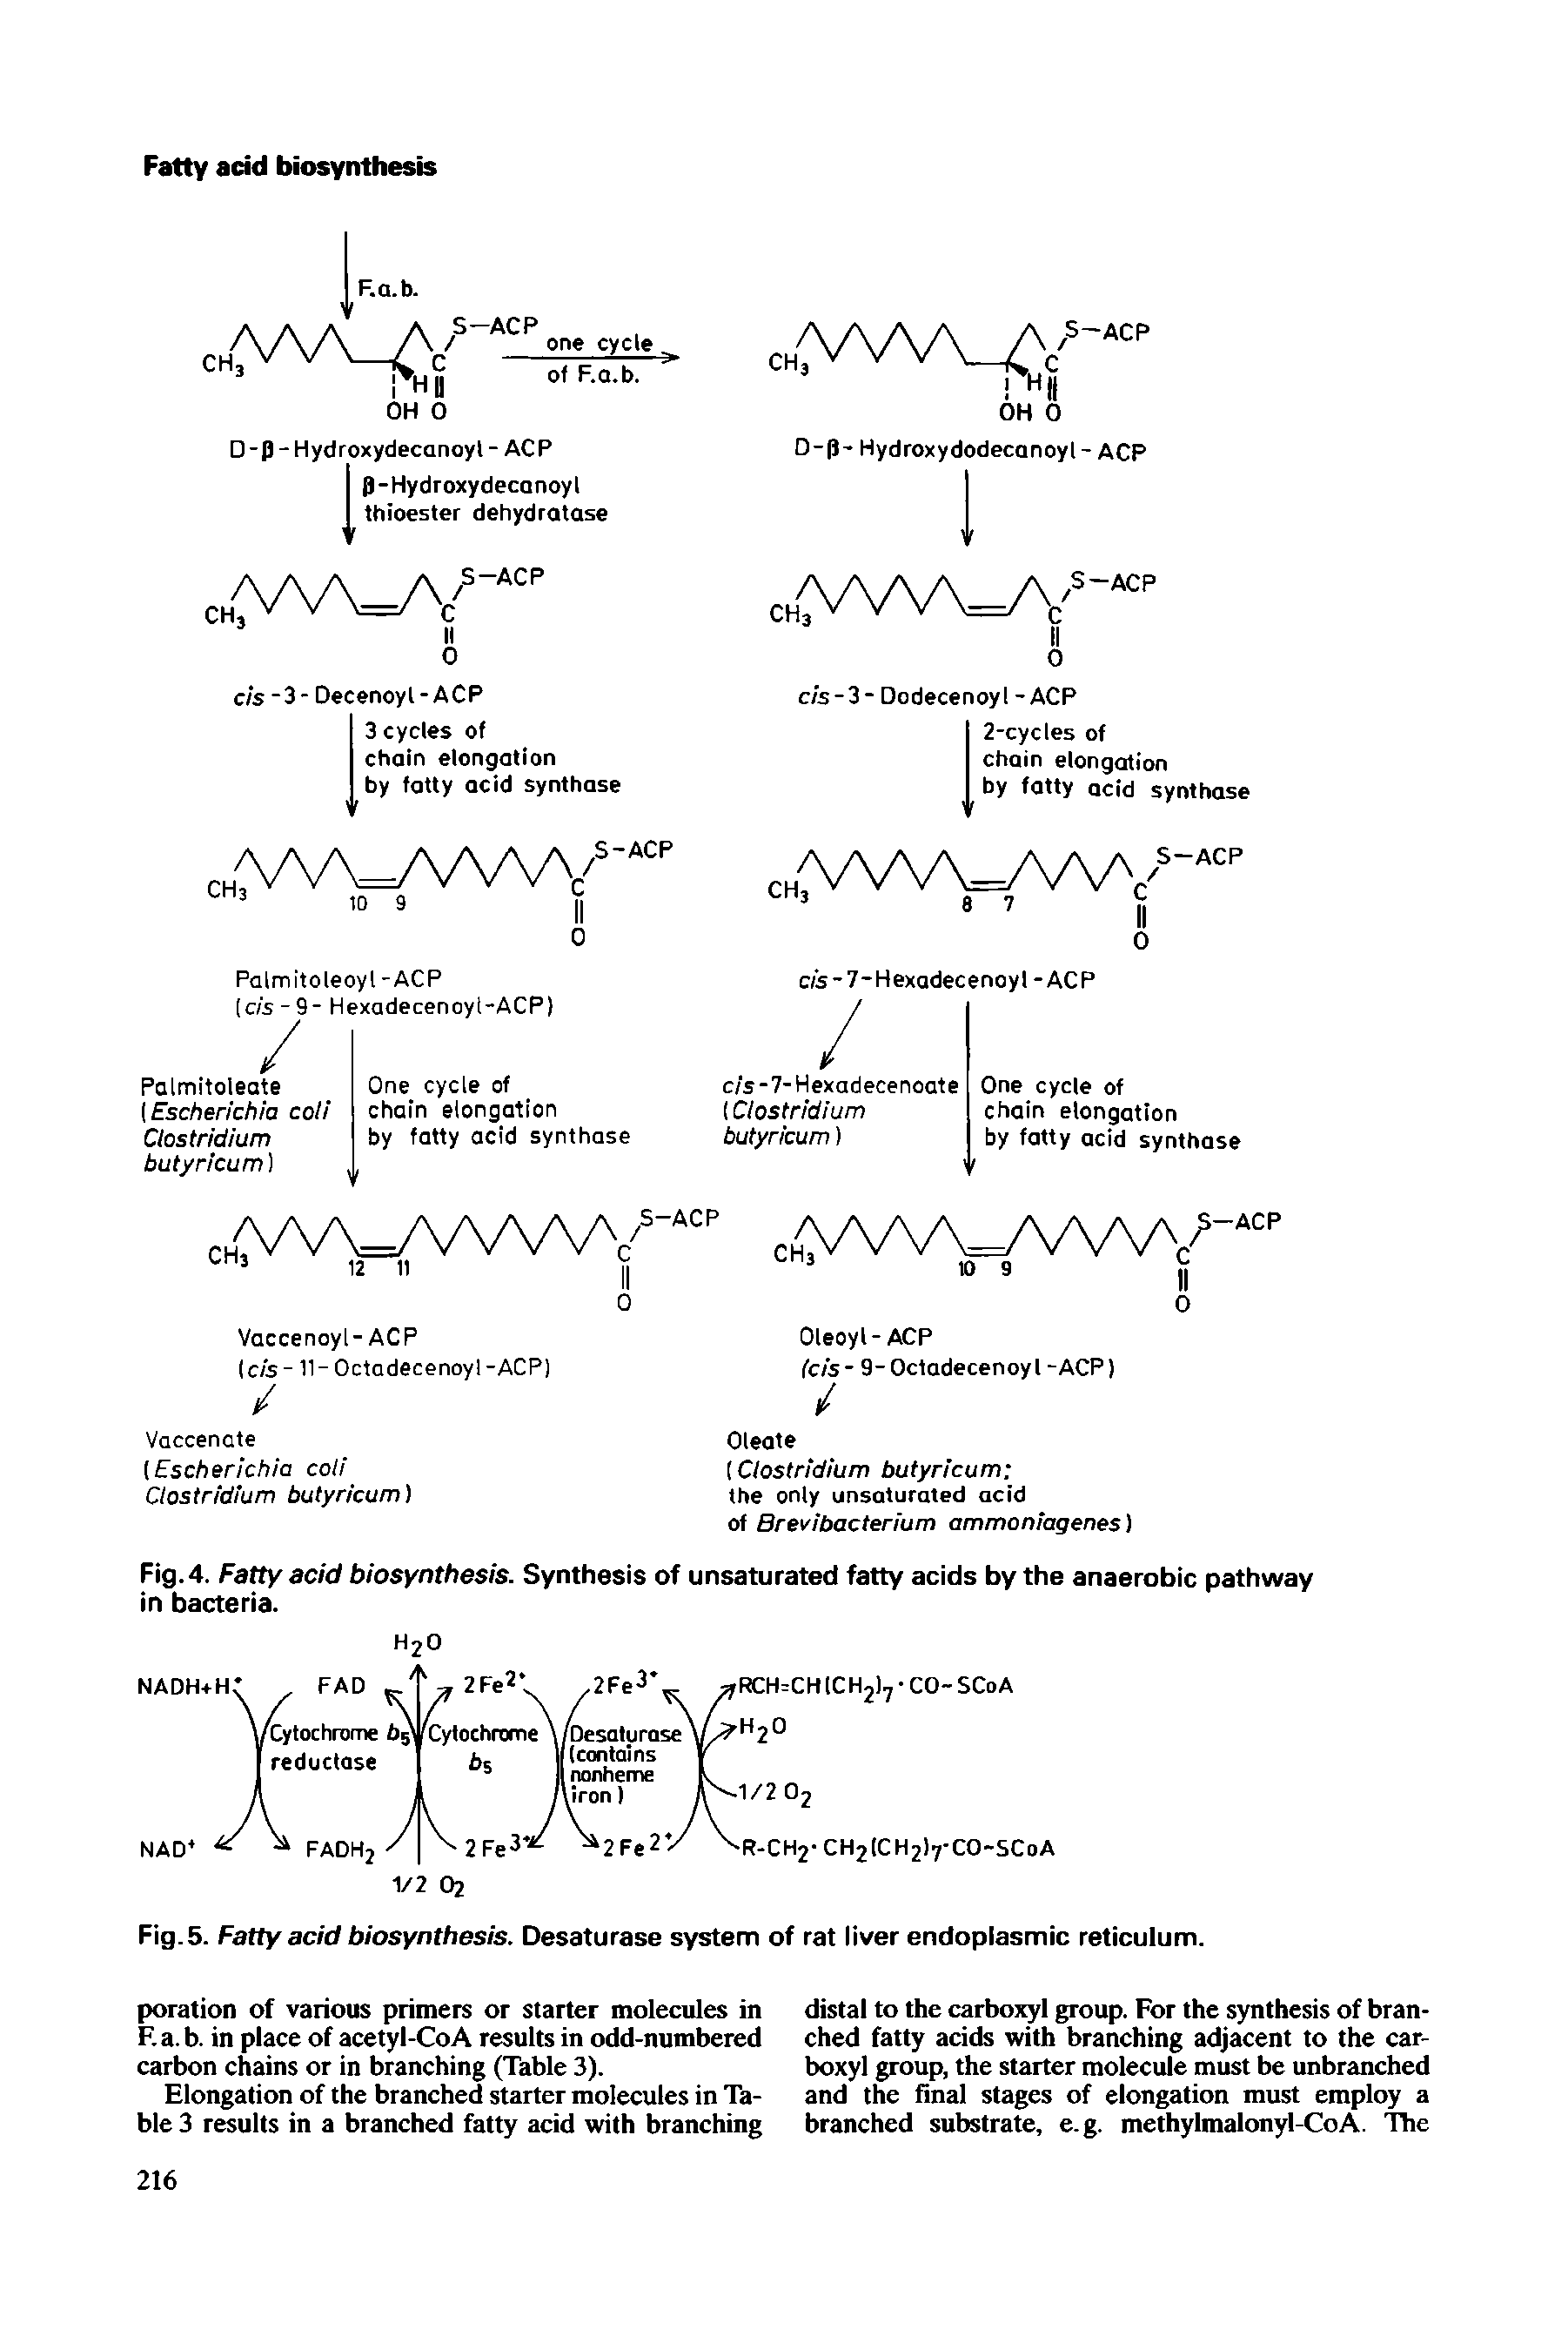 Fig. 4. Fatty acid biosynthesis. Synthesis of unsaturated fatty acids by the anaerobic pathway in bacteria.